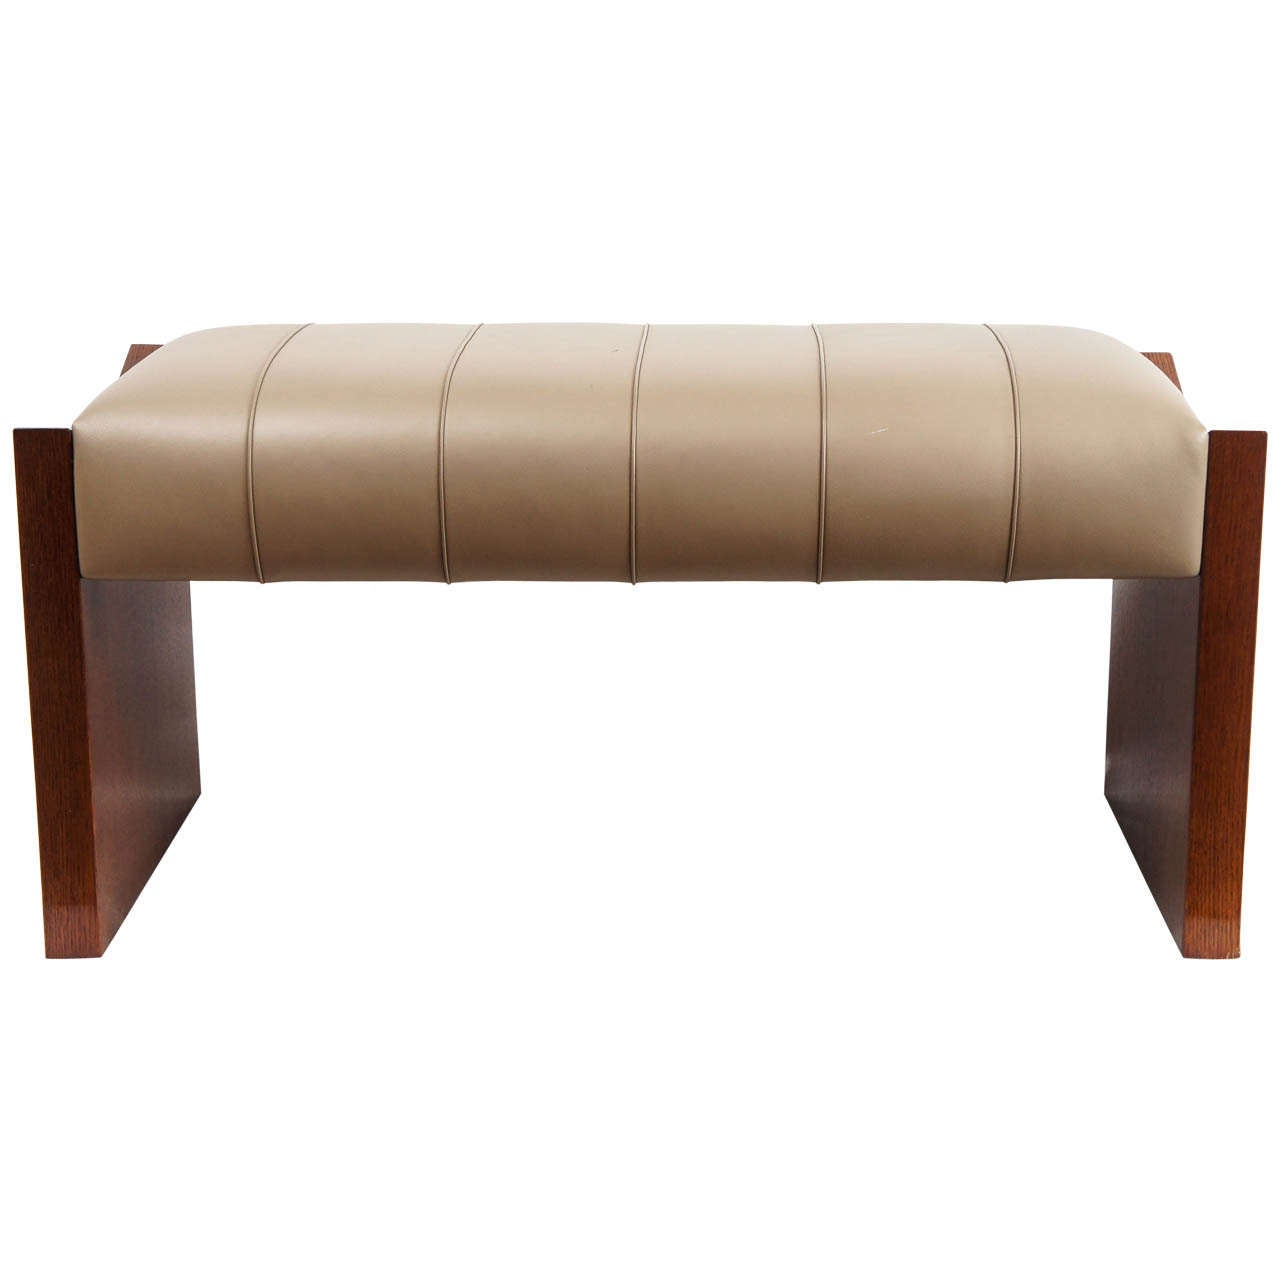 Late 20th Century Upholstered Leather Bench with Wooden Sides For Sale